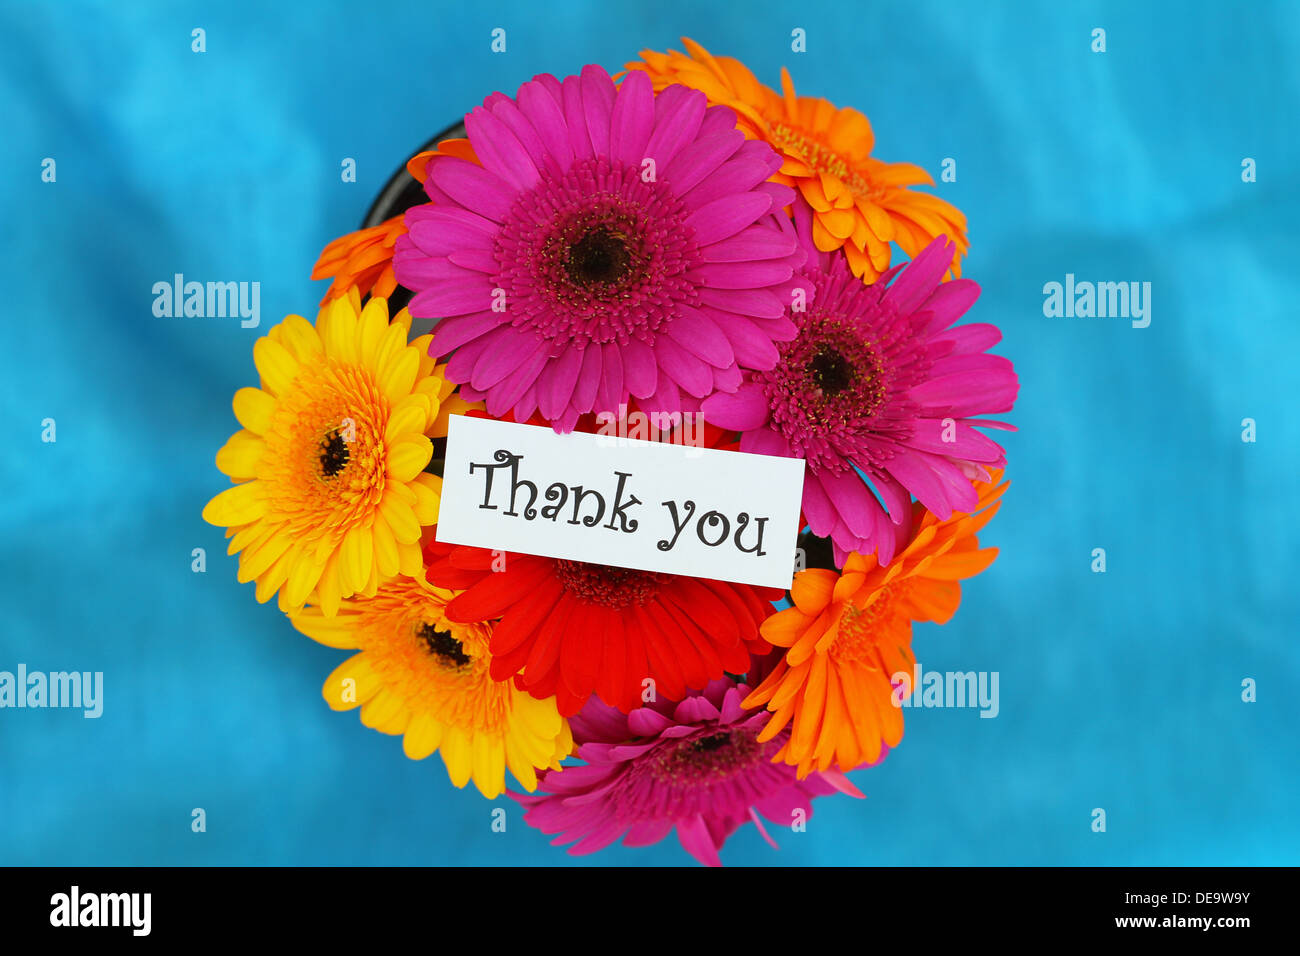 Thank you card with colorful gerbera daisies Stock Photo